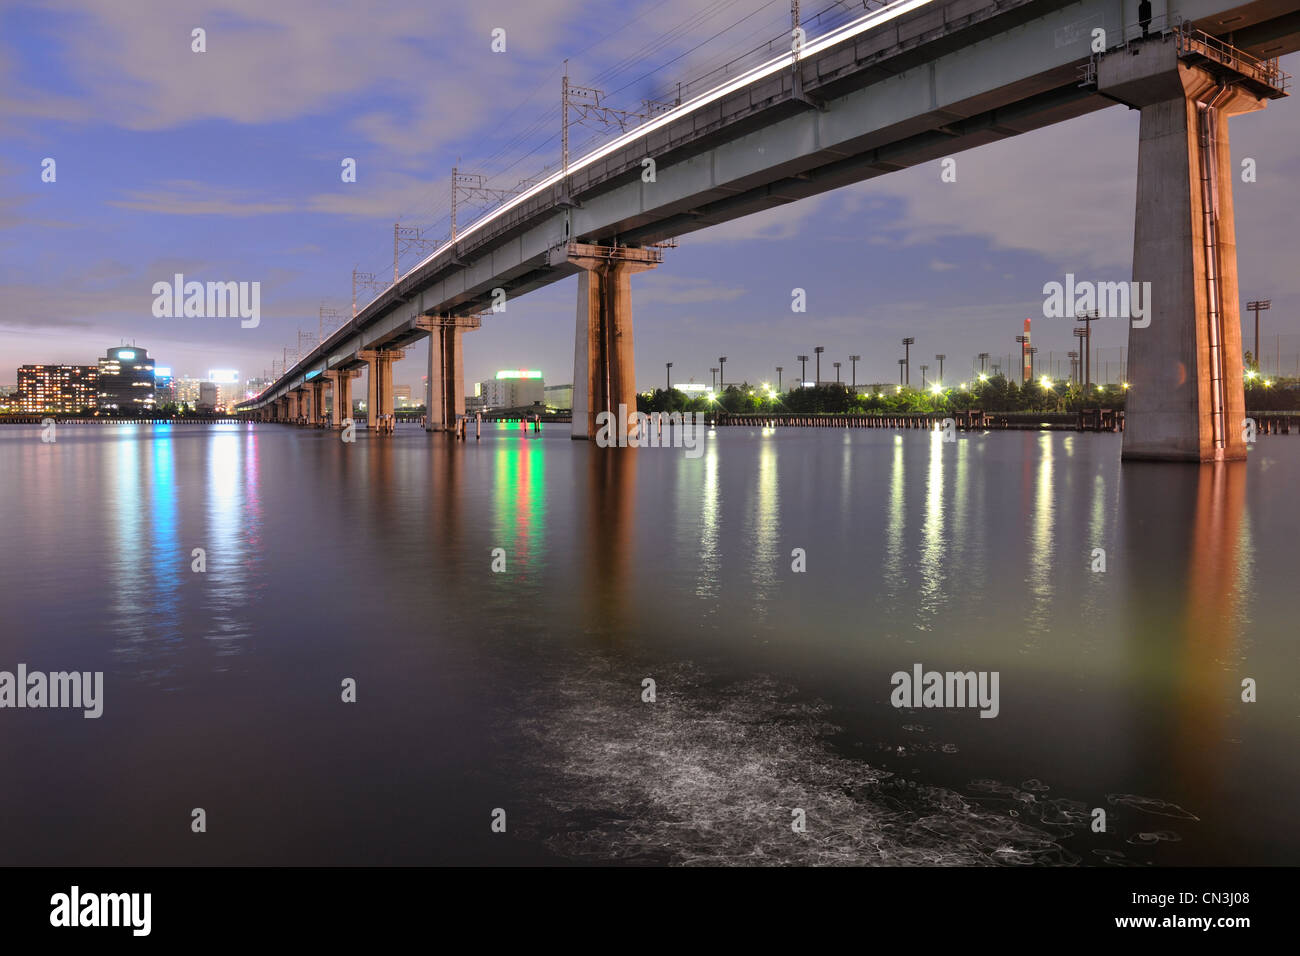 big railway bridge on the tall concrete columns over Tokyo Bay waters by night time Stock Photo